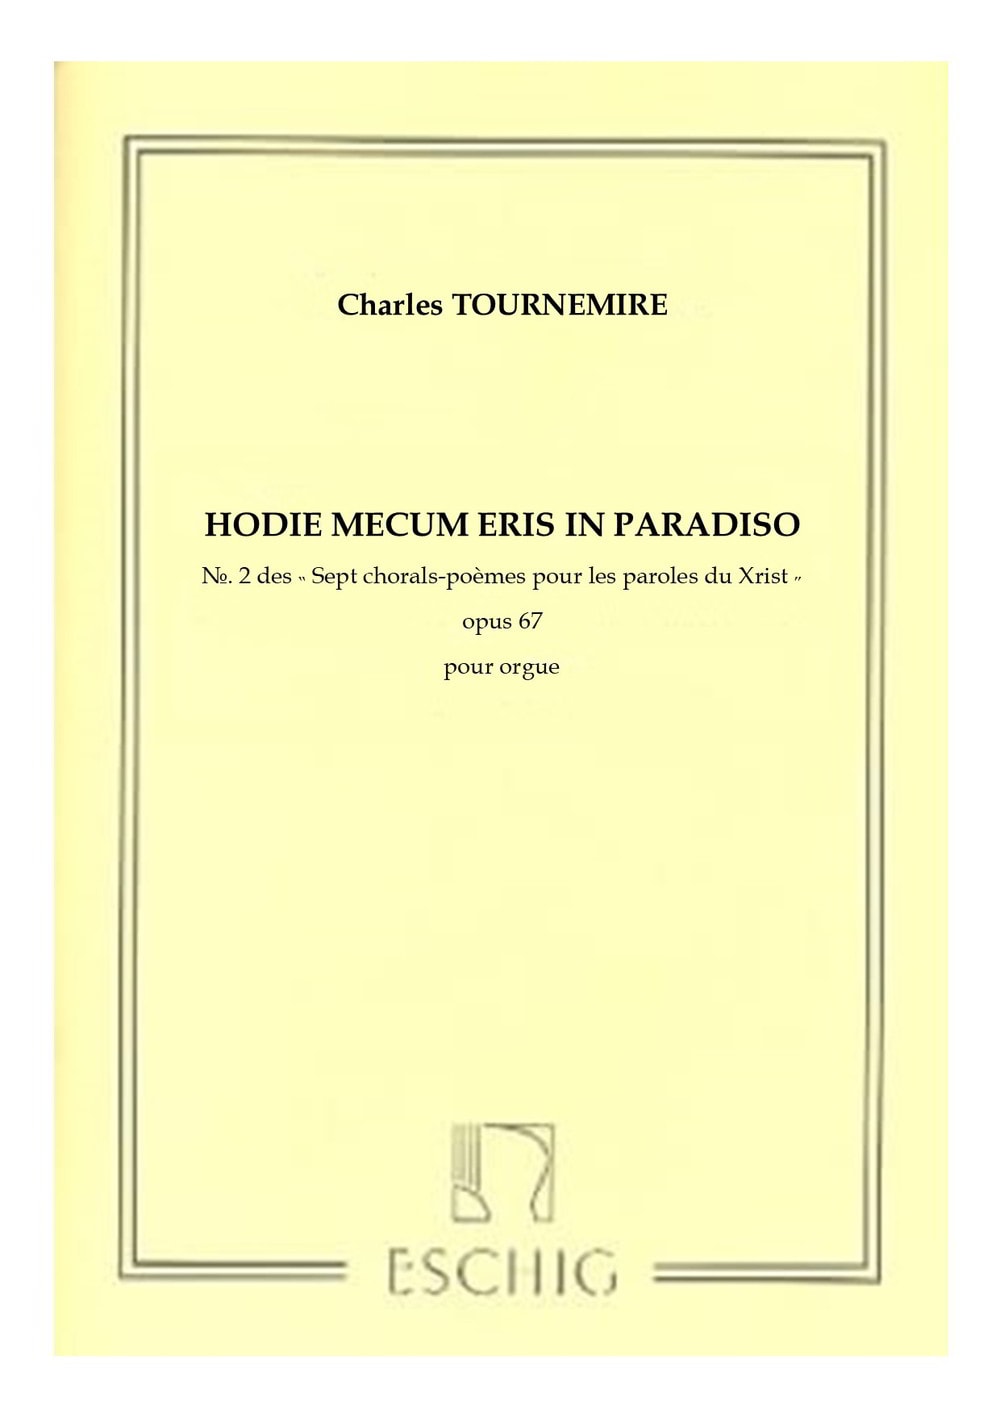 Tournemire: Seven Choral-Poems on the Seven Last Words of Christ Opus 67 No. 2 for Organ published by Max Eschig